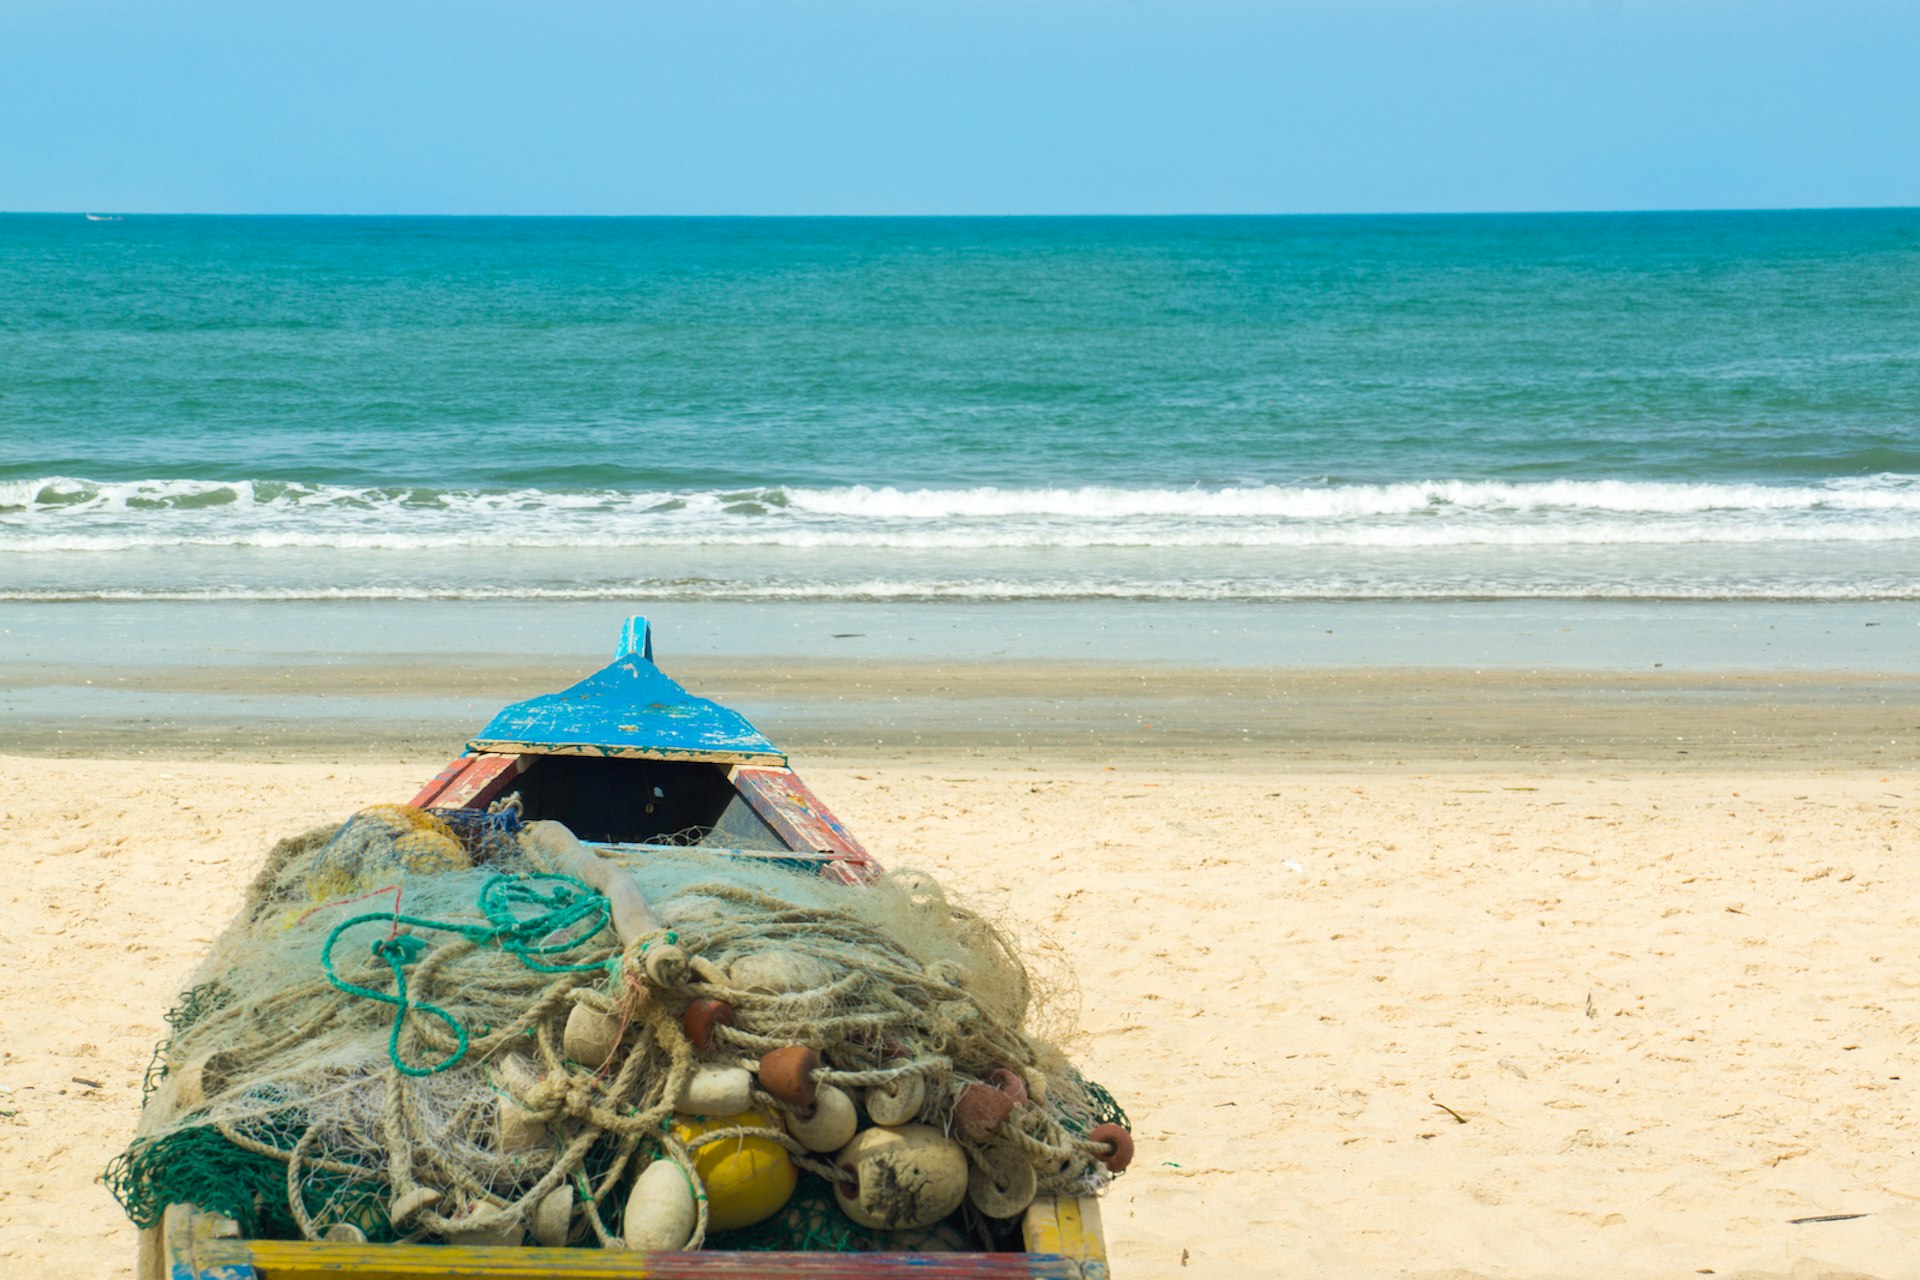 A colofrul pirogue with a fishing net thrown on top on the beach and a view of blue-green water in Kotu